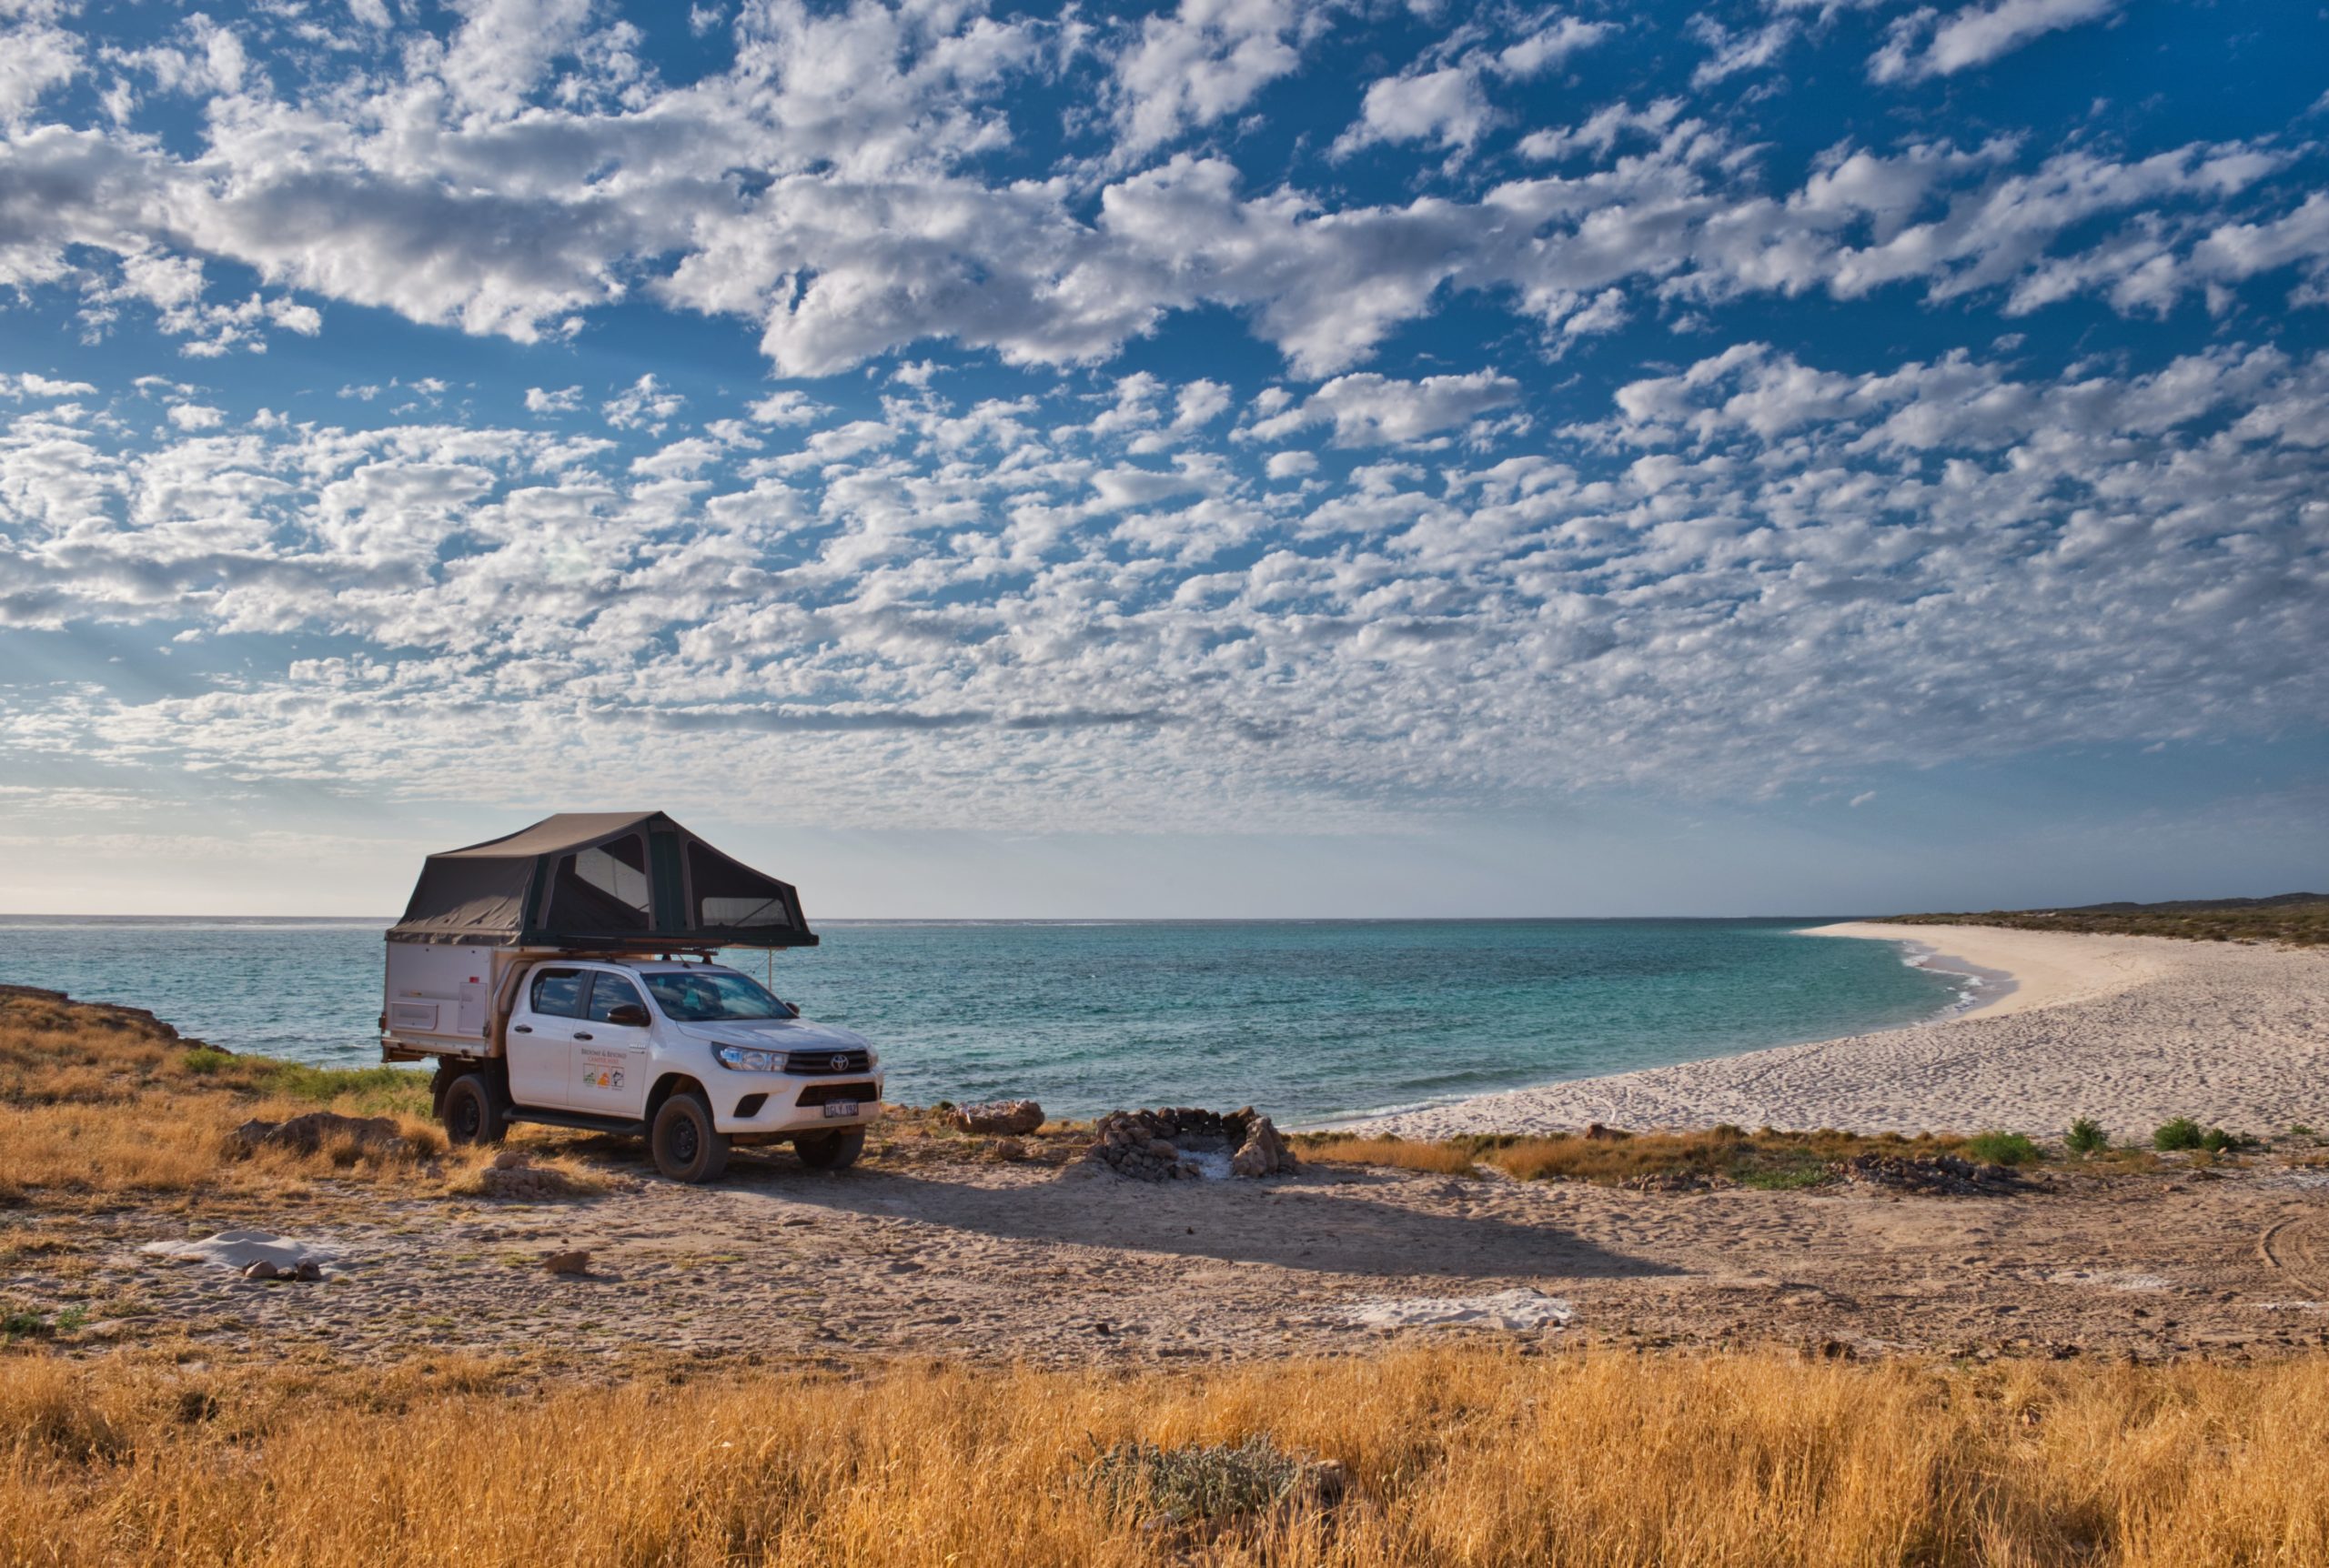 A modified truck with a storage unit in the back and a rooftop tent is parked at a beach on a sunny day. Turquoise water laps behind and stratocumulus clouds cover the blue sky.